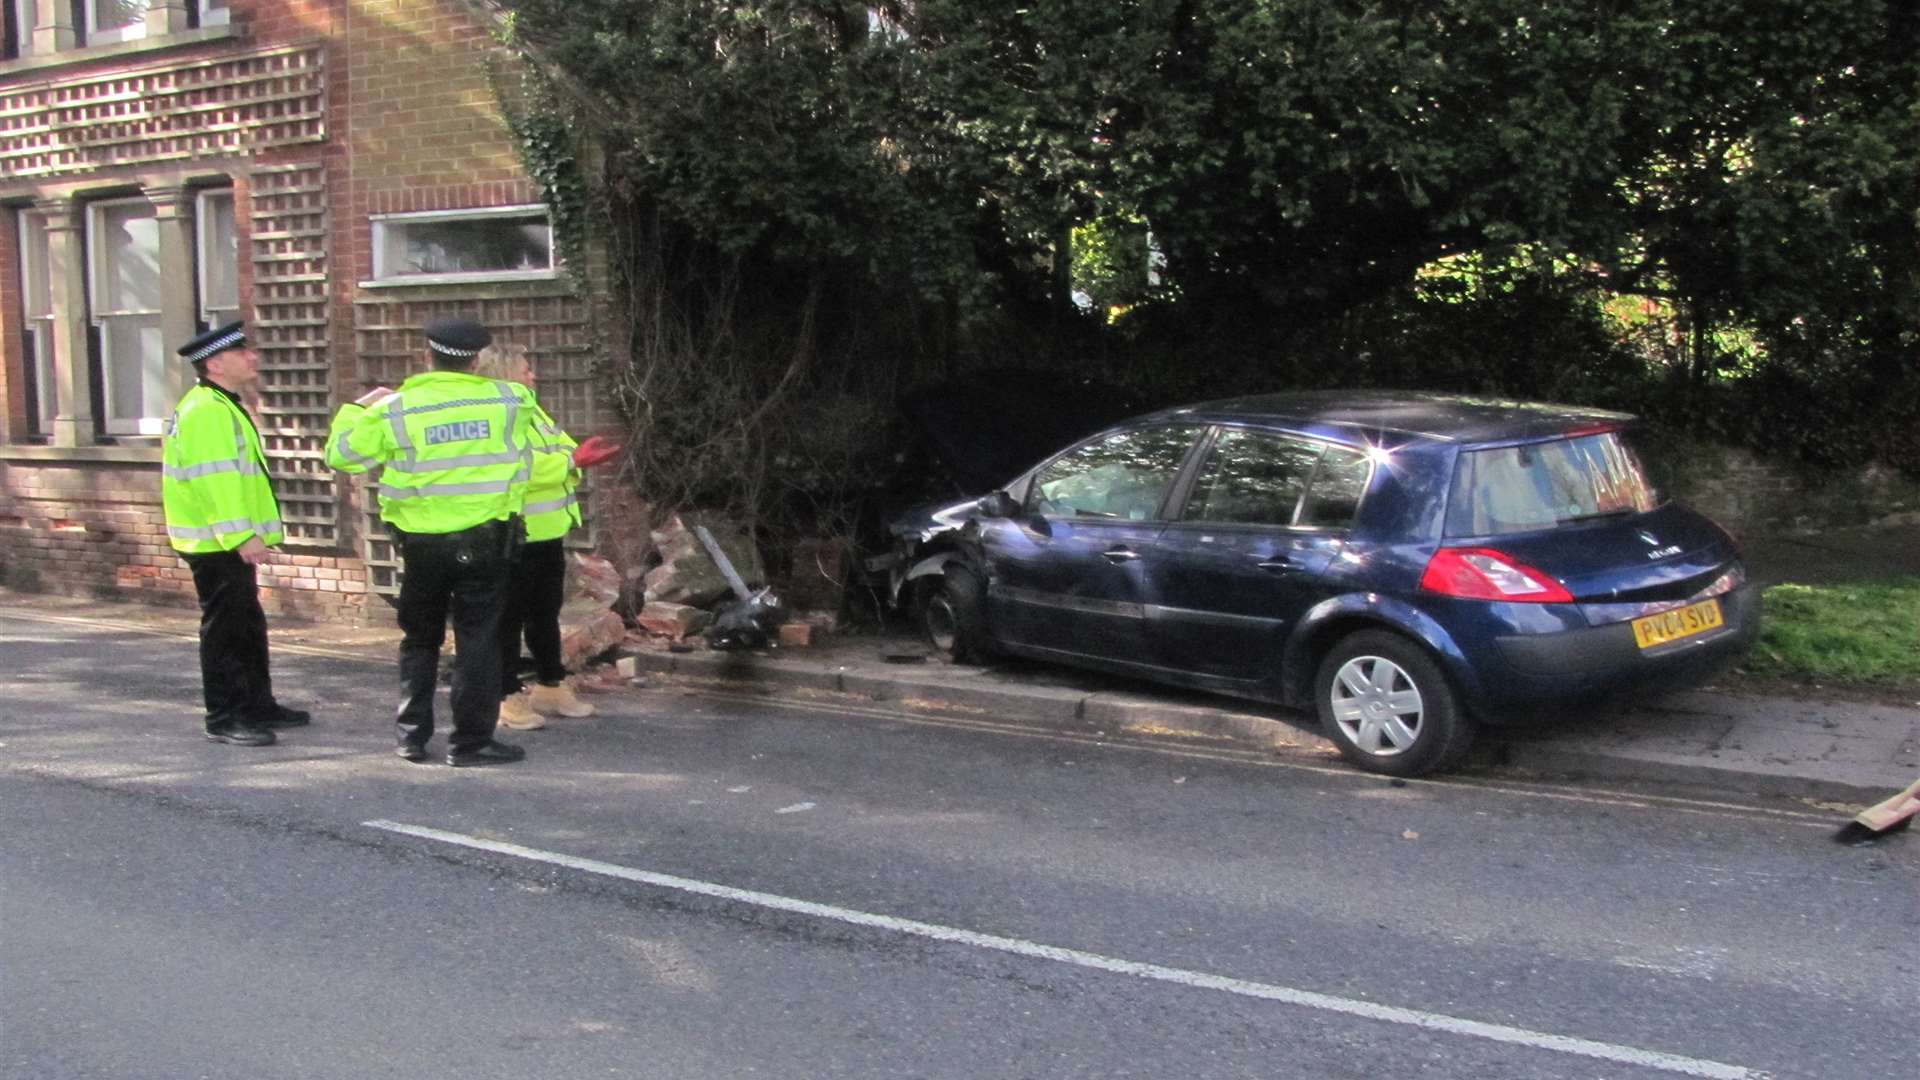 Policeman was driving car when it crashed into a house.